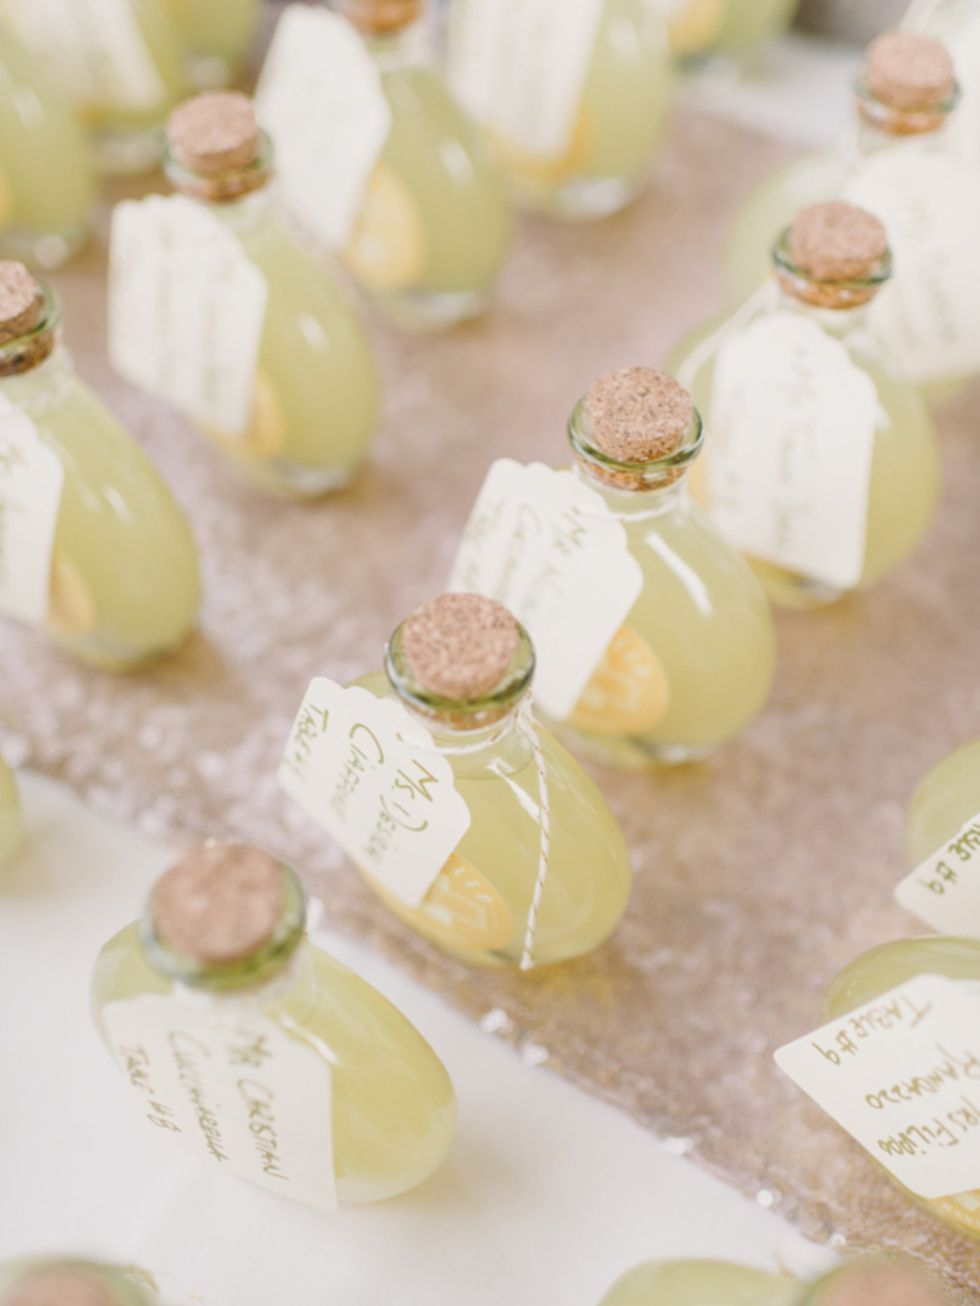 <p>Limoncello favours -<a href="http://www.stylemepretty.com/collection/1902/picture/2197896/" target="_blank"> Style Me Pretty</a></p>